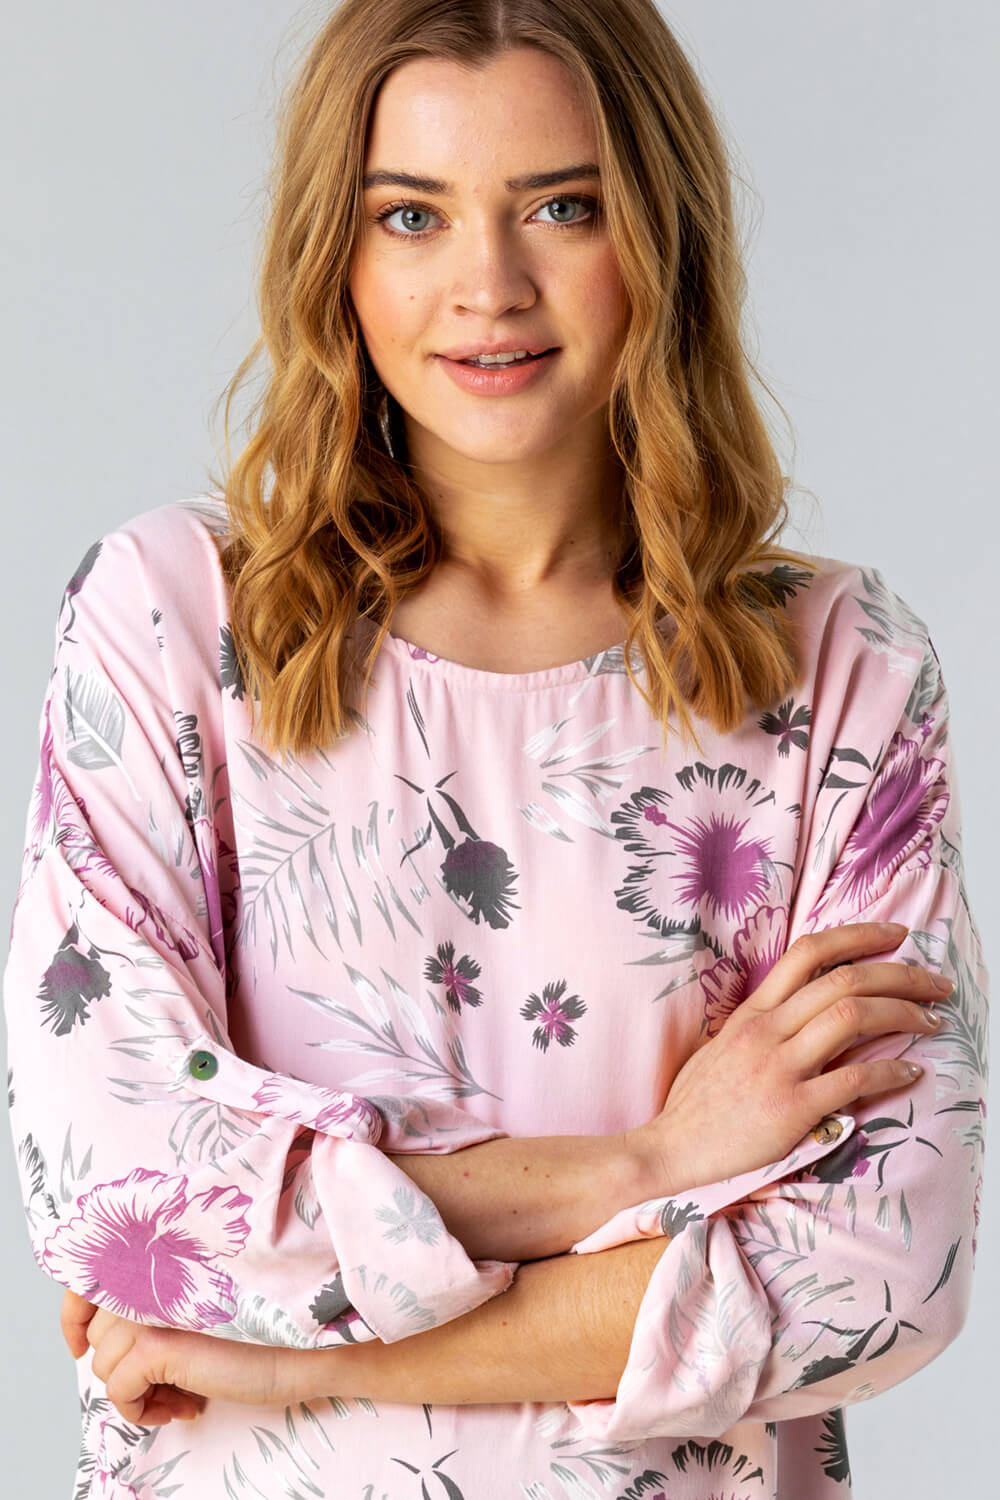 PINK Floral Print Longline Tunic Top, Image 4 of 4